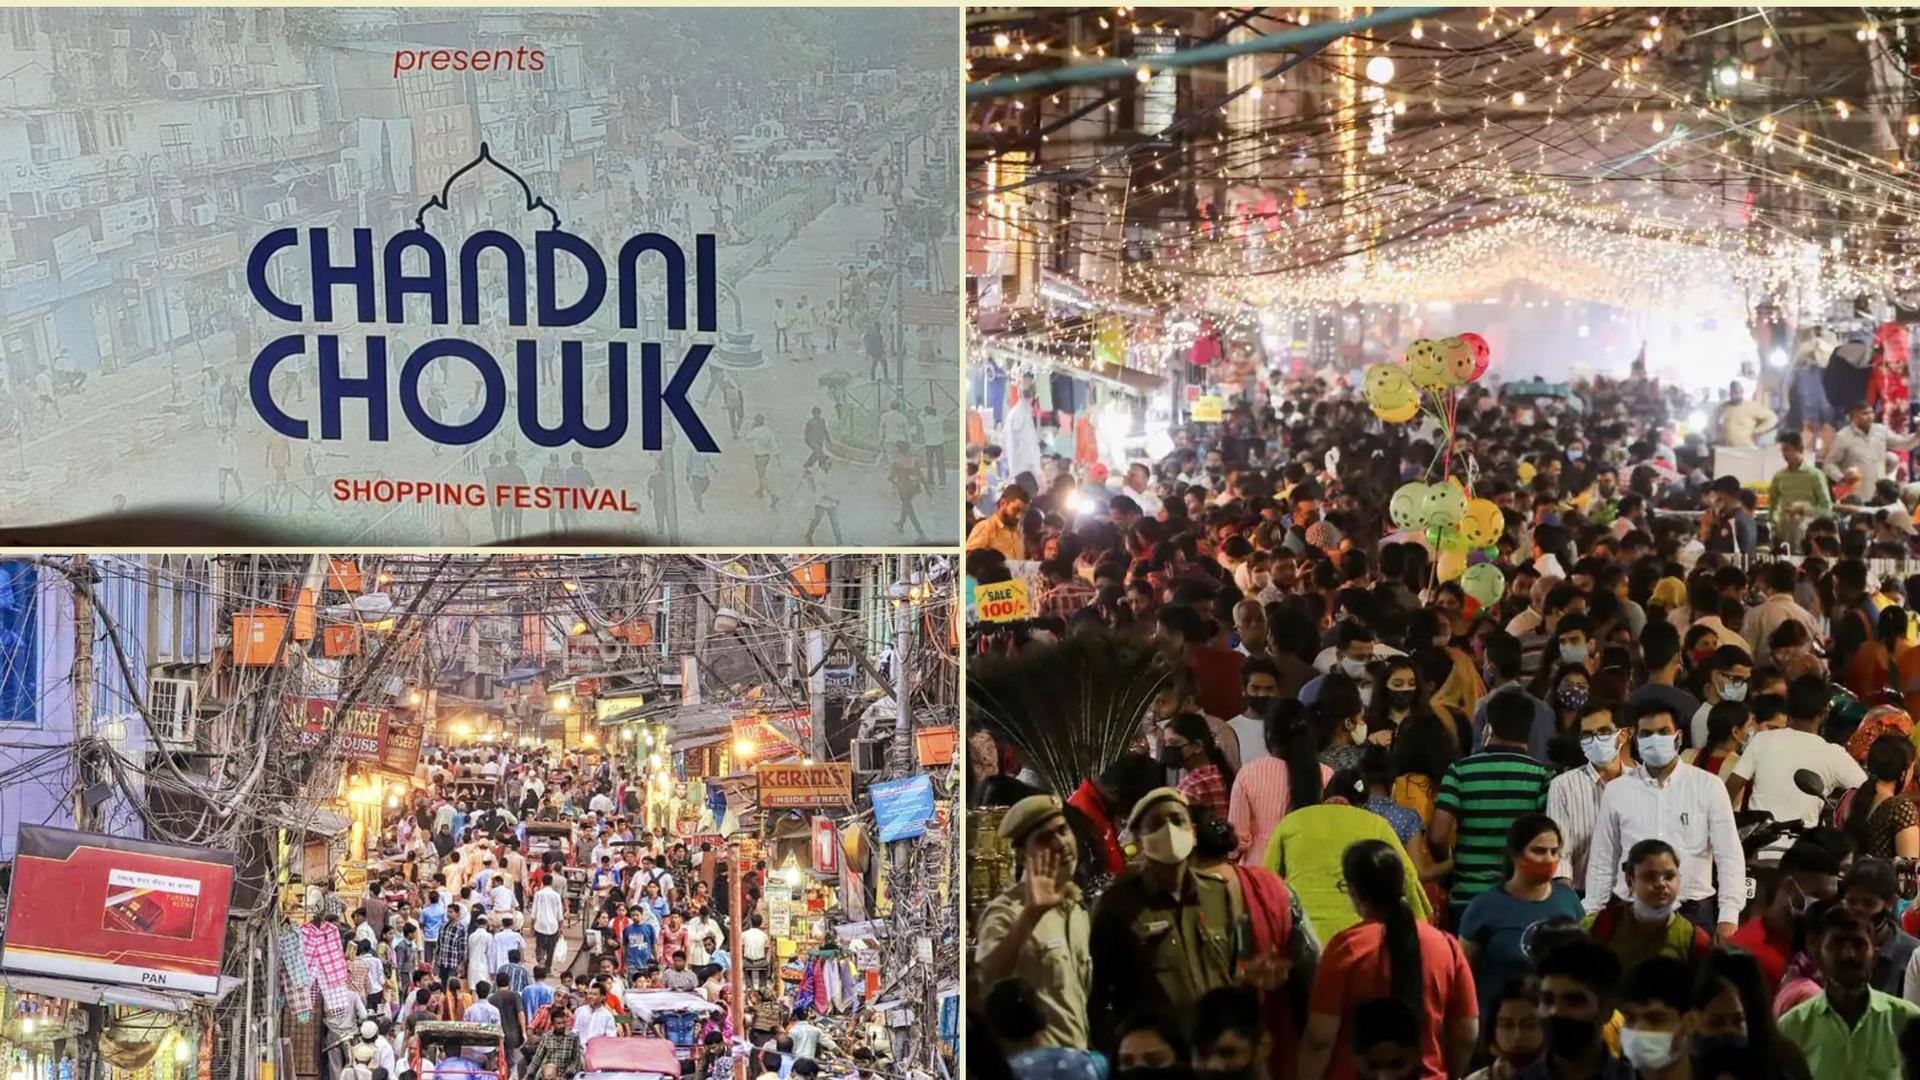 Chandni Chowk Shopping Festival on September 9: What to expect